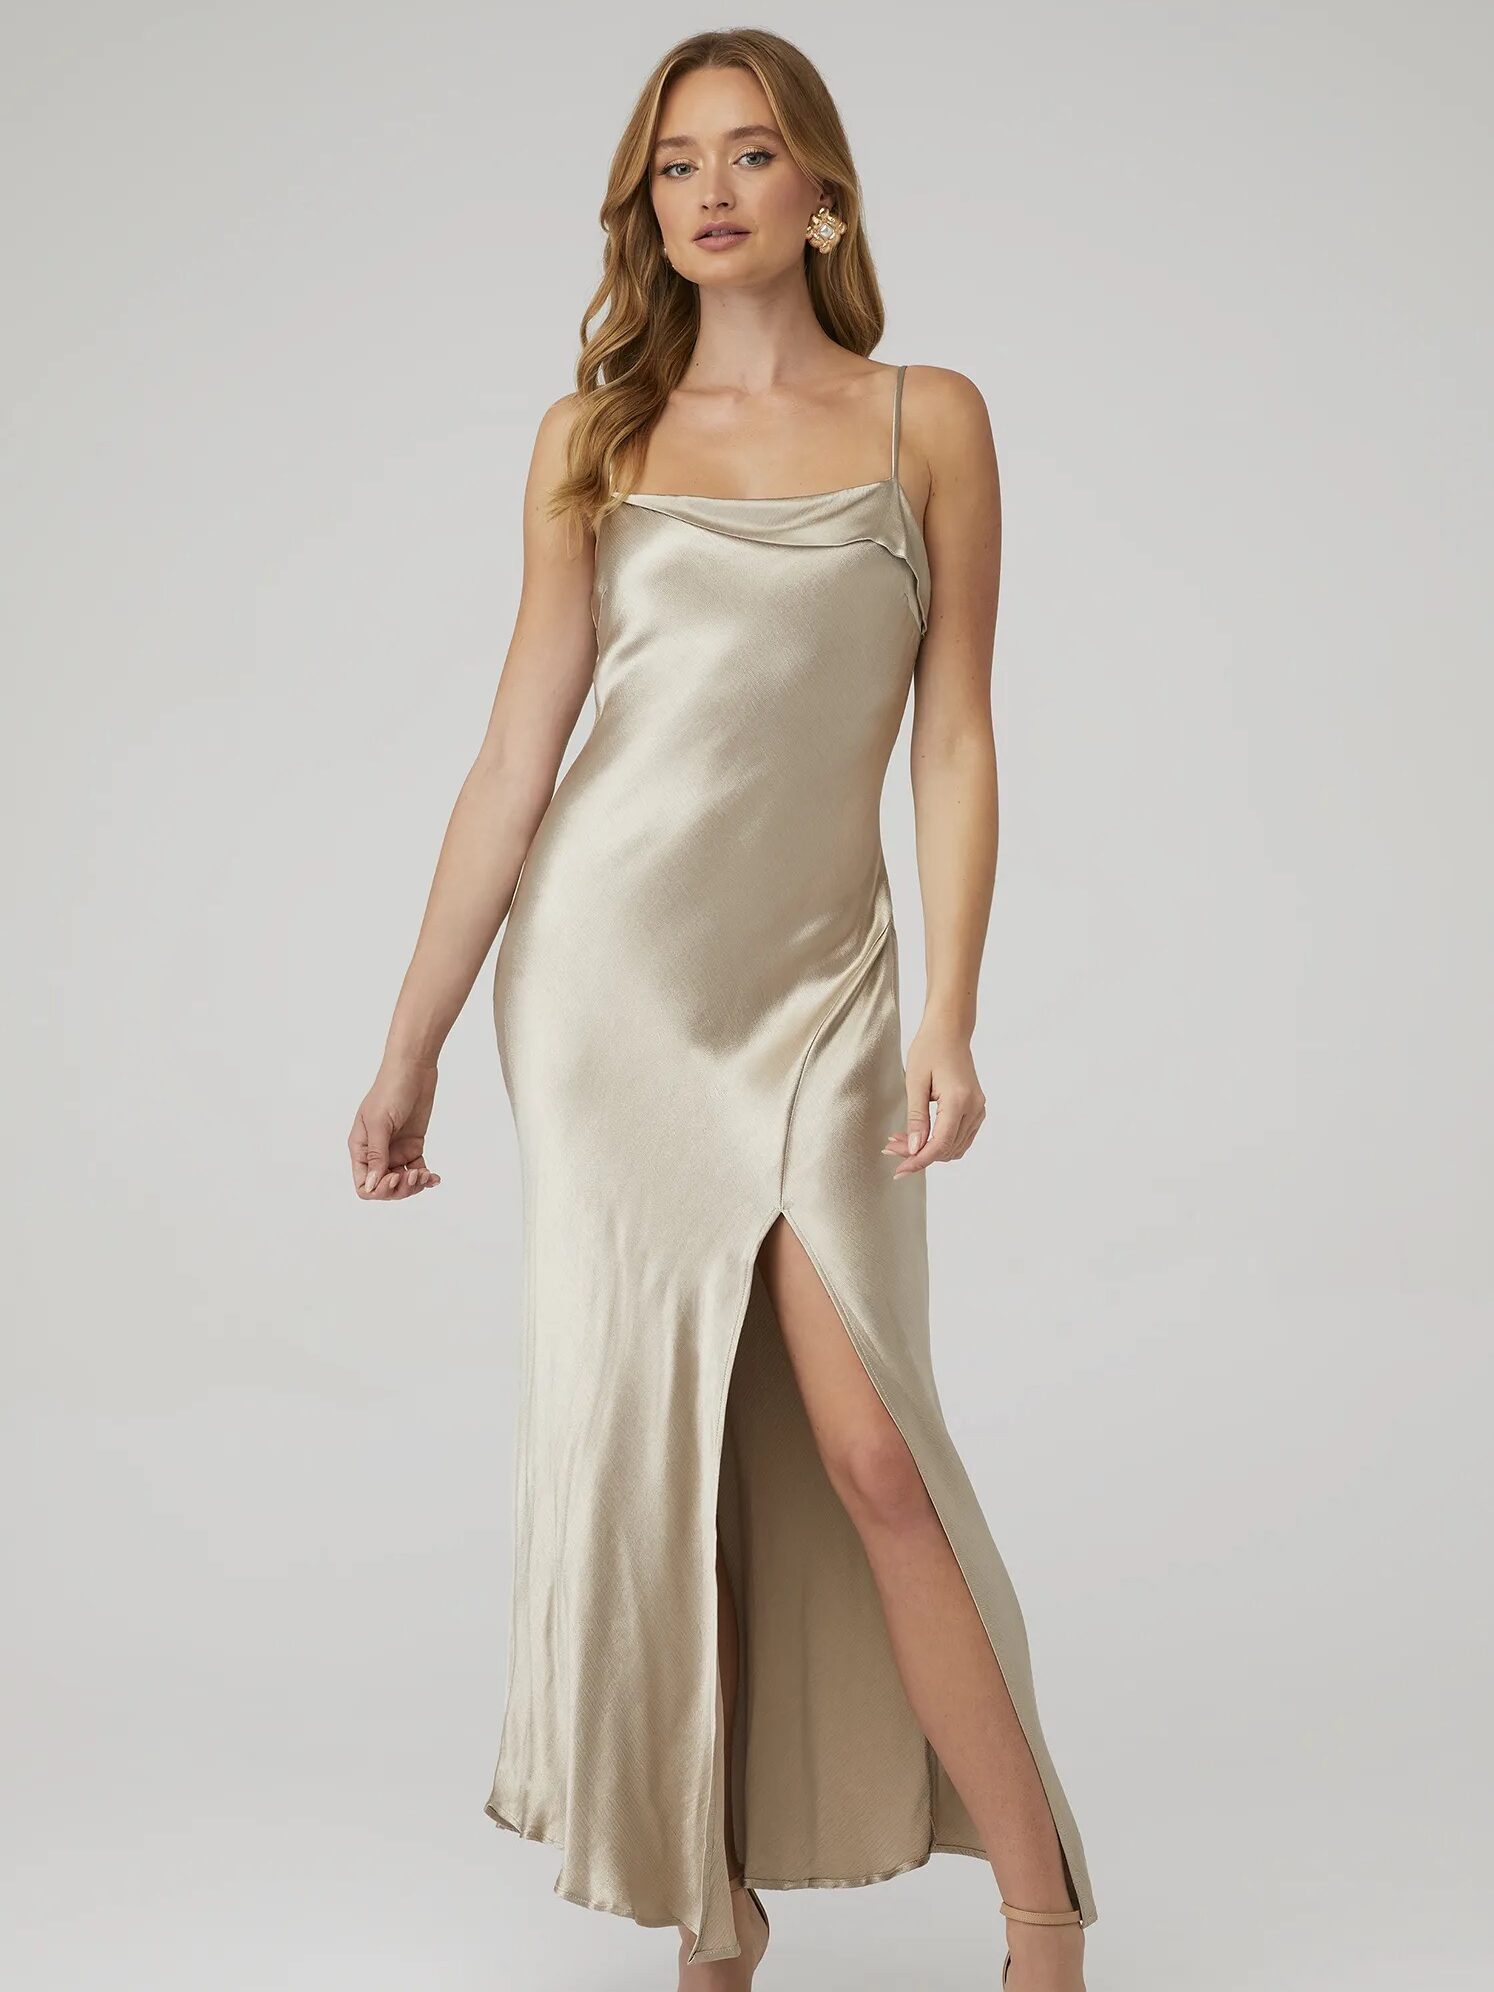 Woman in a silky champagne-colored slip dress with a thigh-high slit, standing against a grey background.